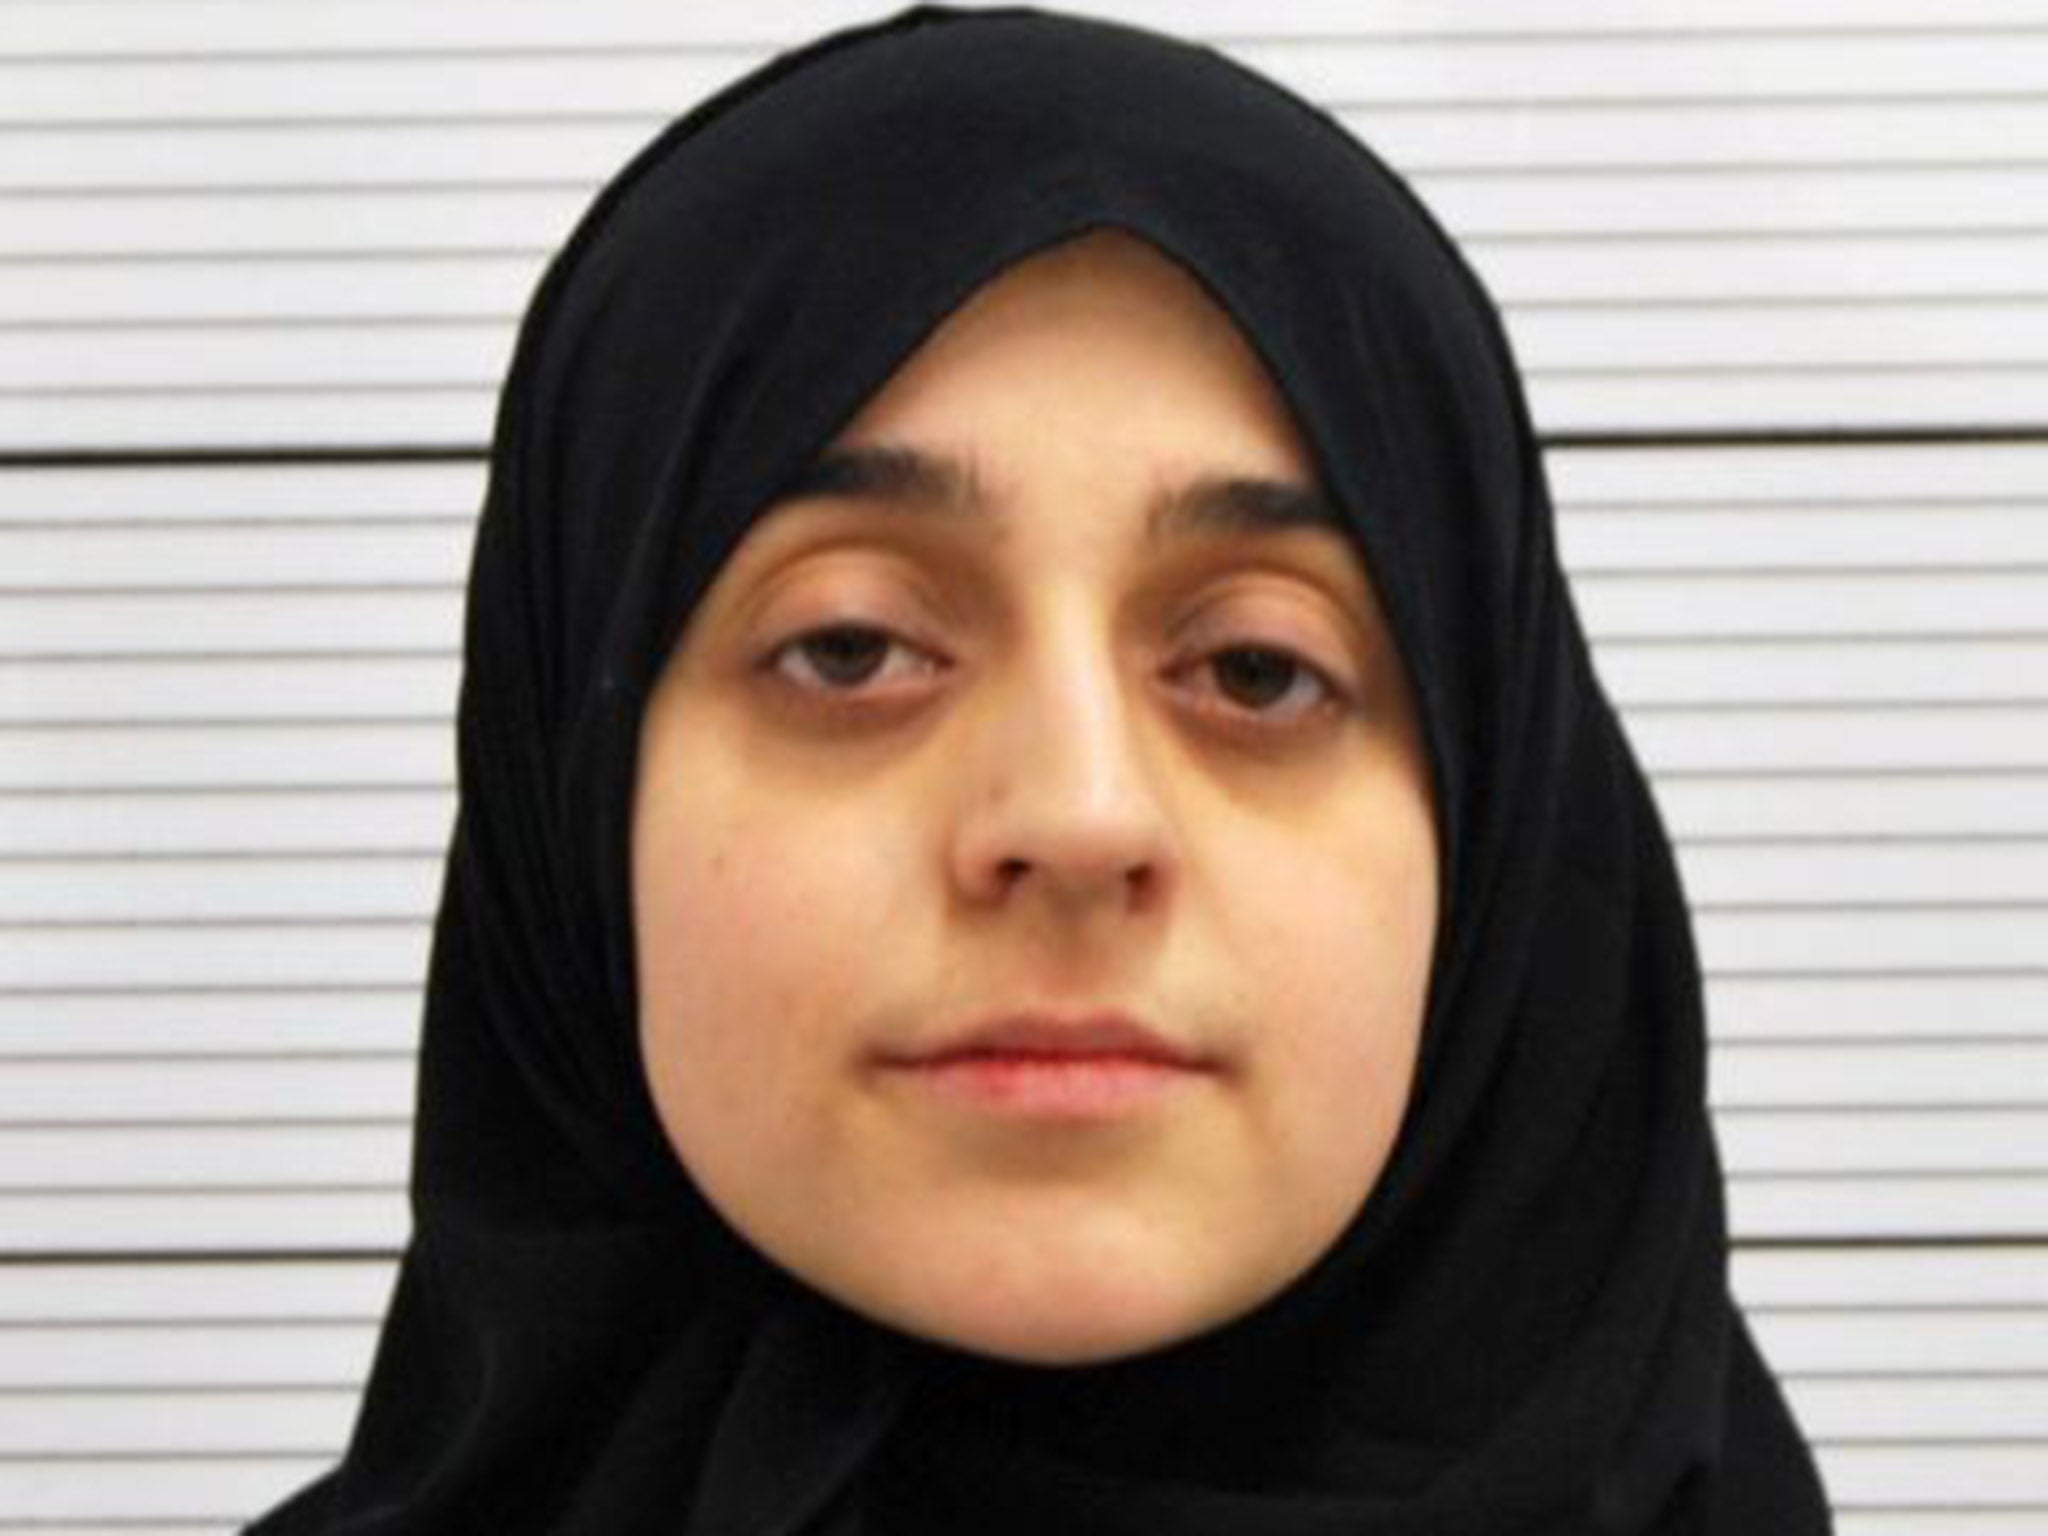 Tareena Shakil went to Syria to join Isis in October 2014 but fled in January 2015